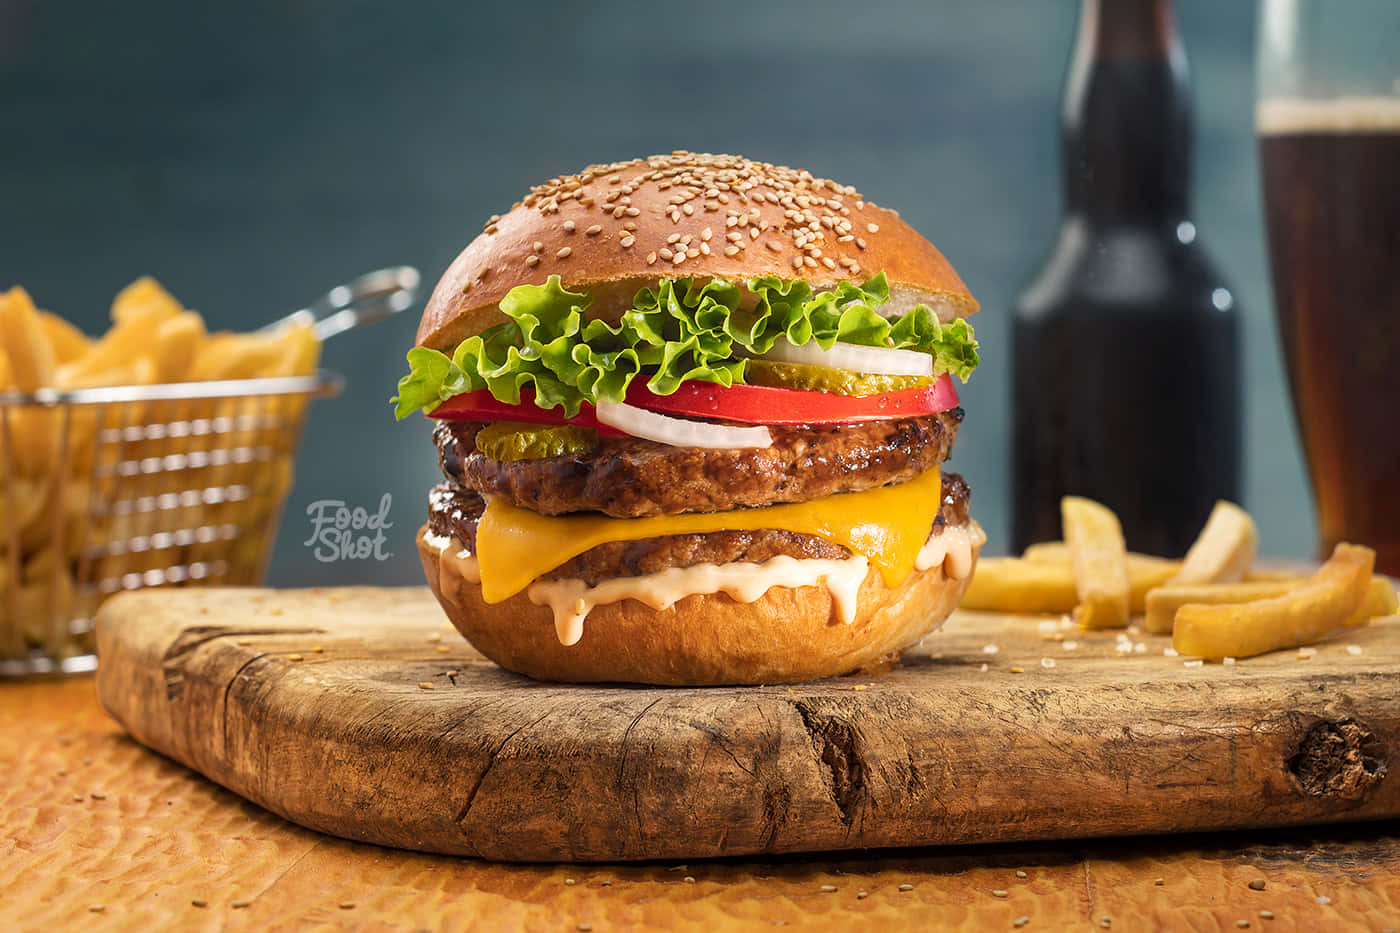 Enjoy Delicious Hamburgers Anytime With The Perfect Balance Of Beef, Cheese and Bun